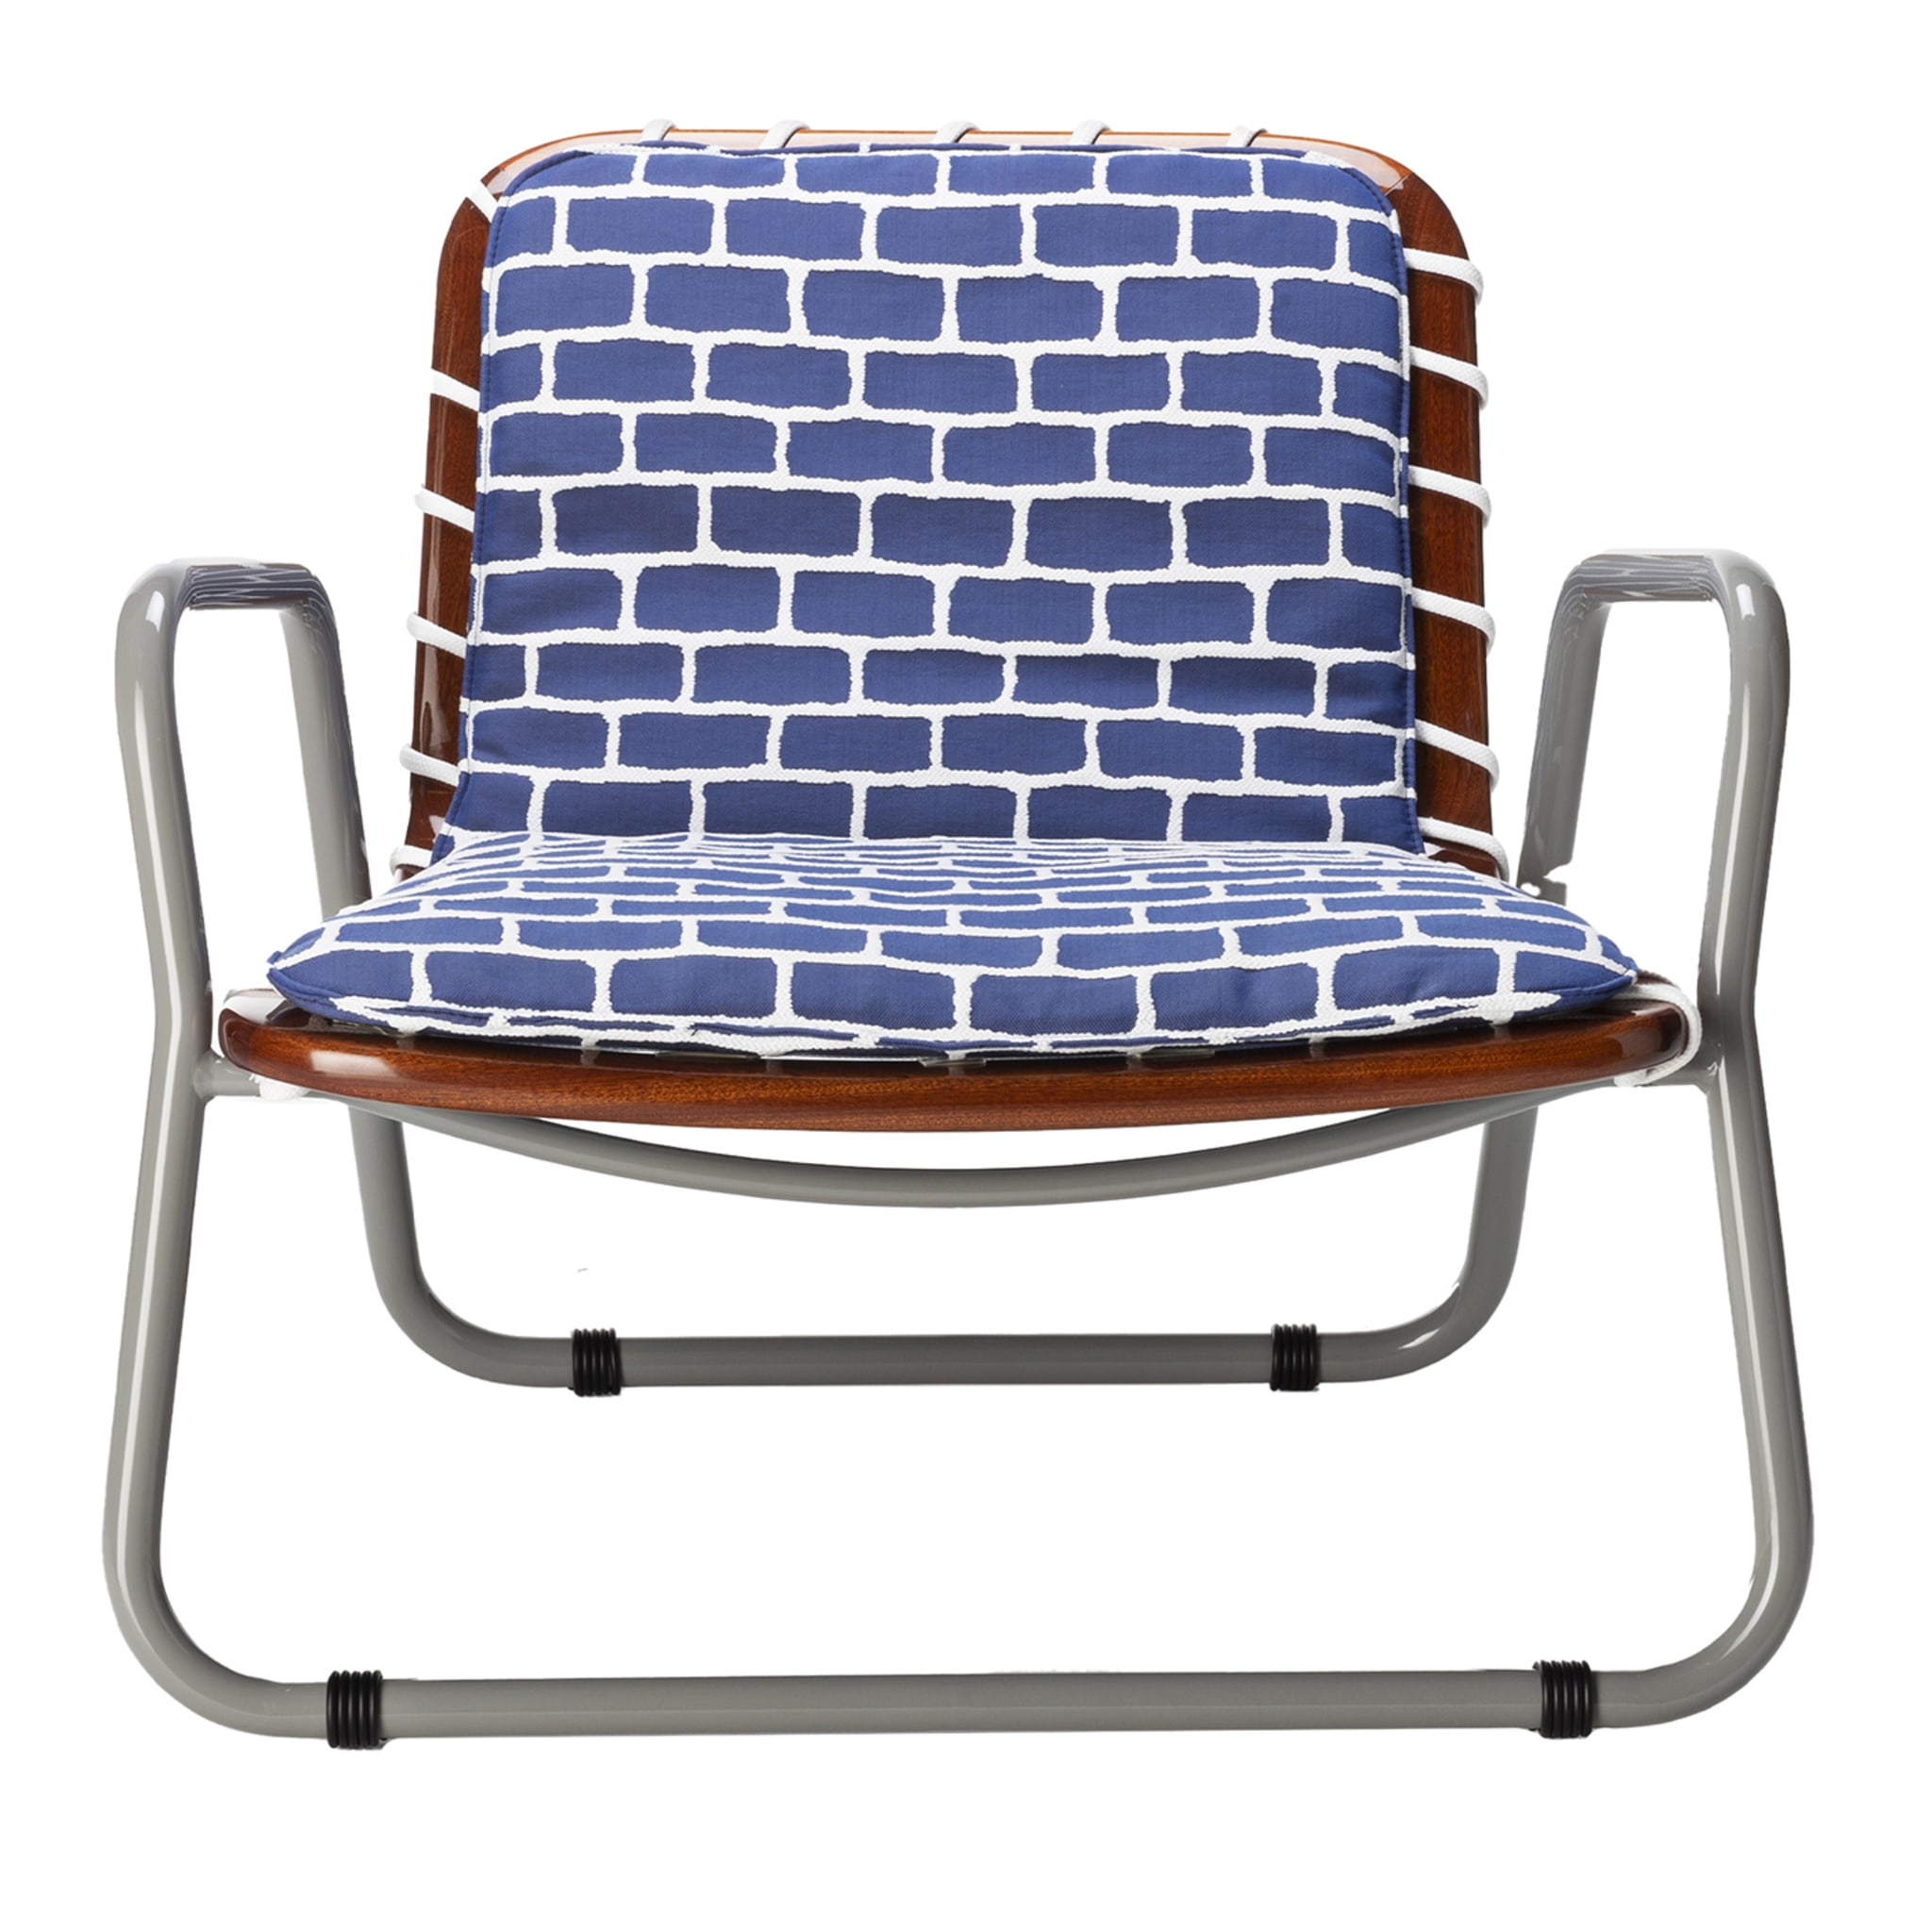 Sunset Lounge Armchair by Paola Navone - Main view